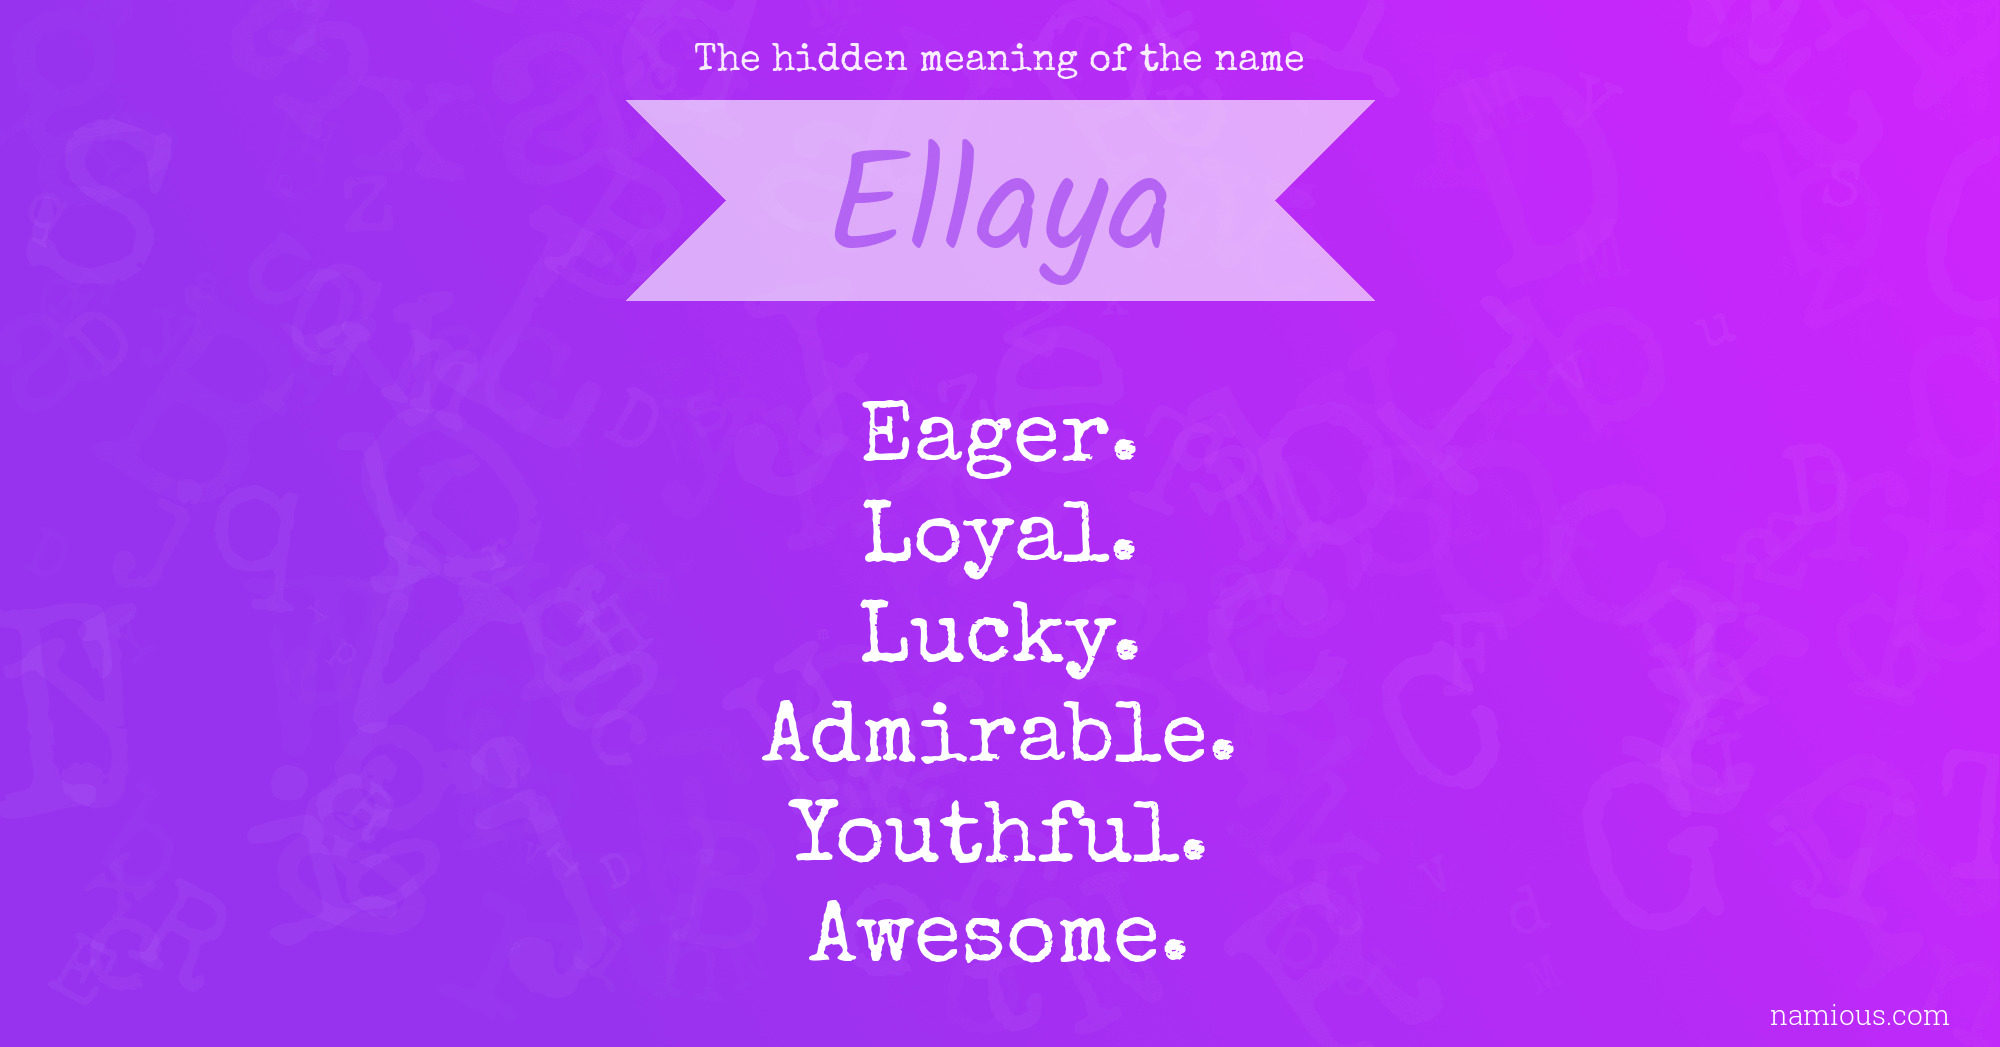 The hidden meaning of the name Ellaya